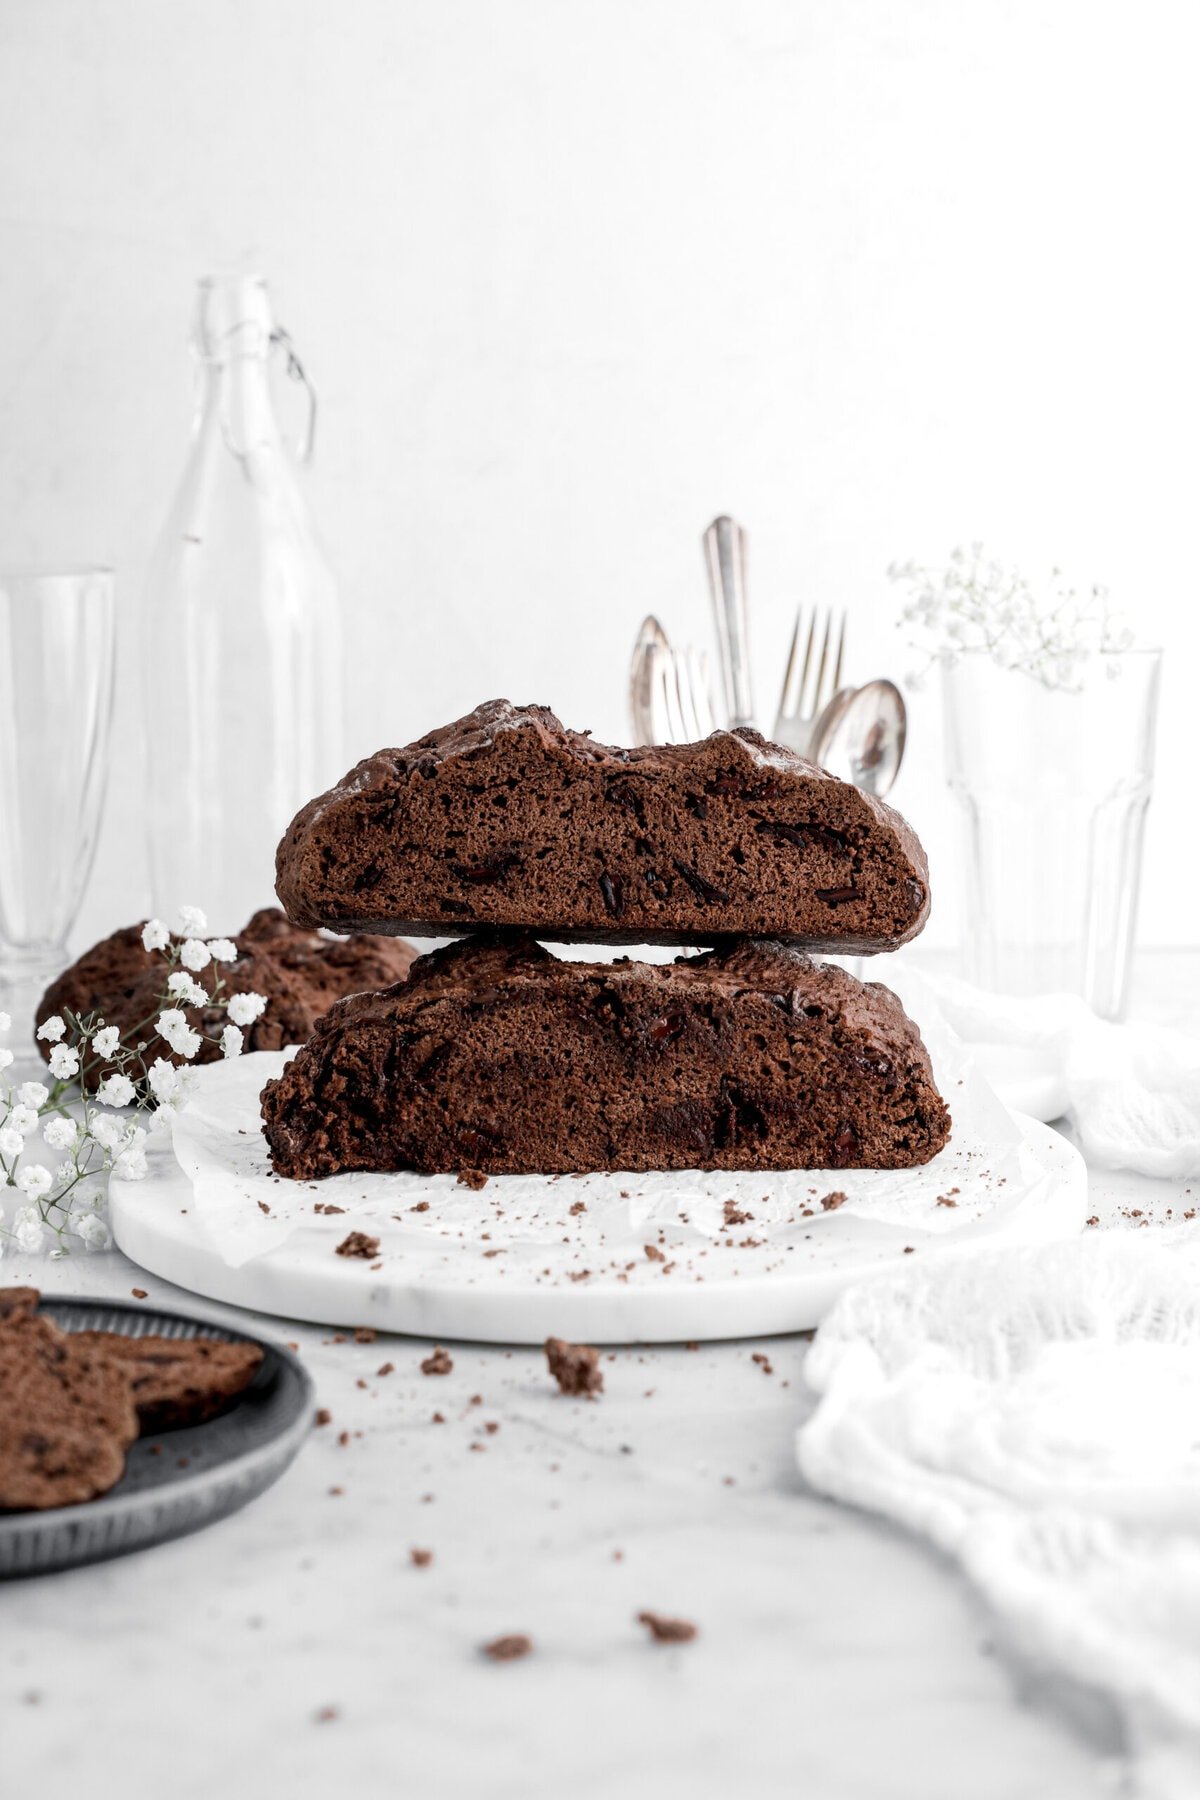 two halves of chocolate soda bread stacked on top of each other on marble surface with white flowers and crumbs around and another loaf of chocolate soda bread behind.